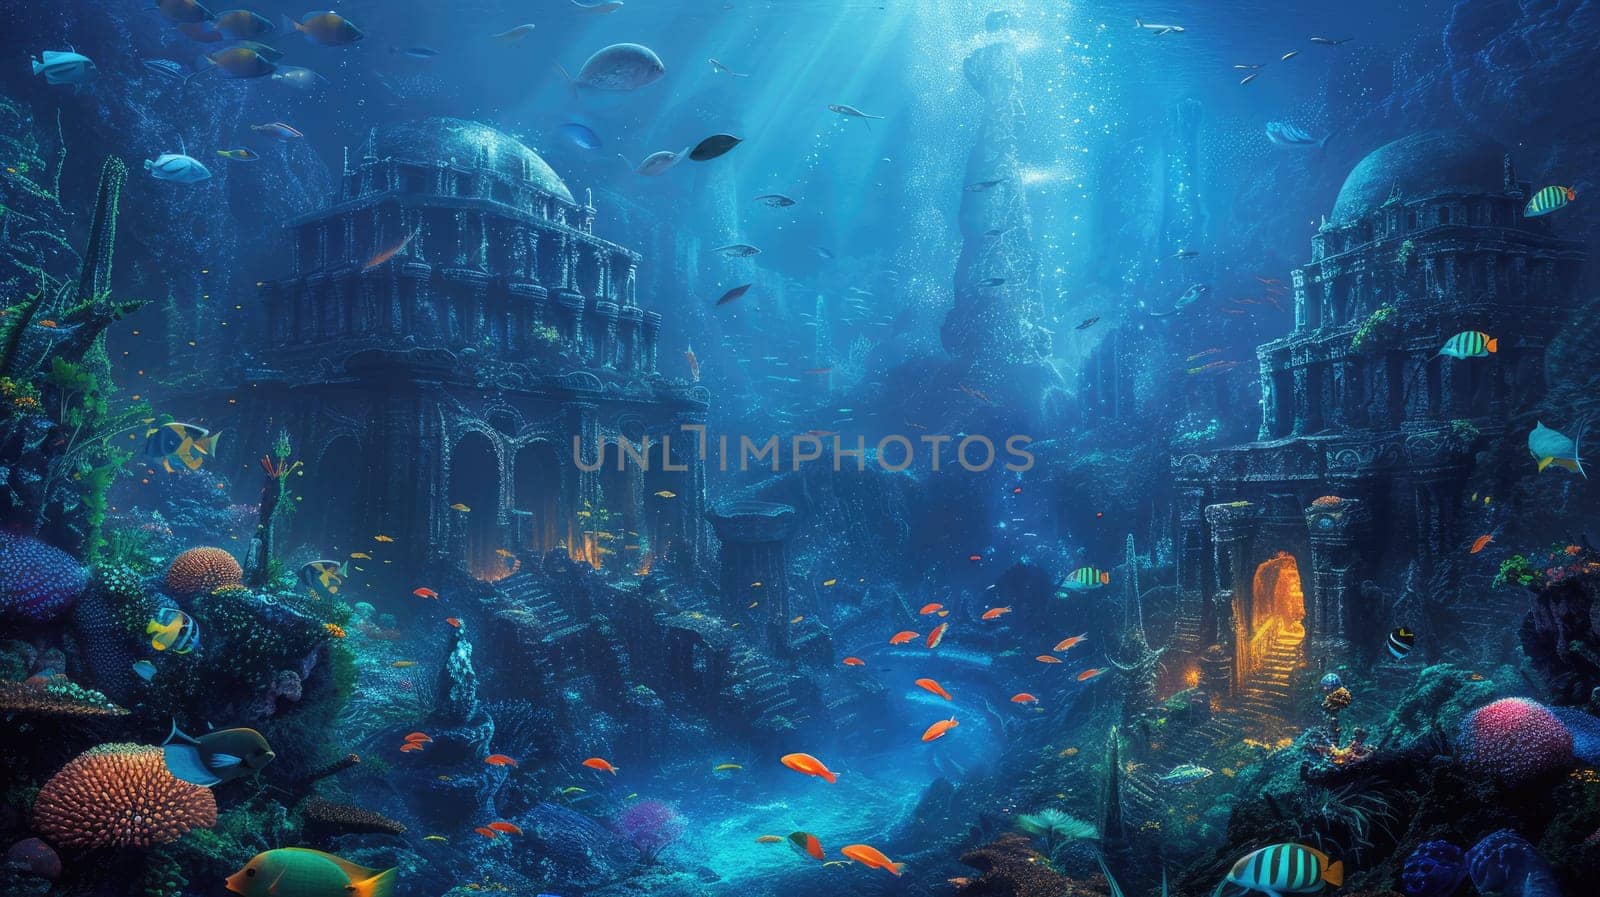 An underwater city with bioluminescent coral. Resplendent. by biancoblue